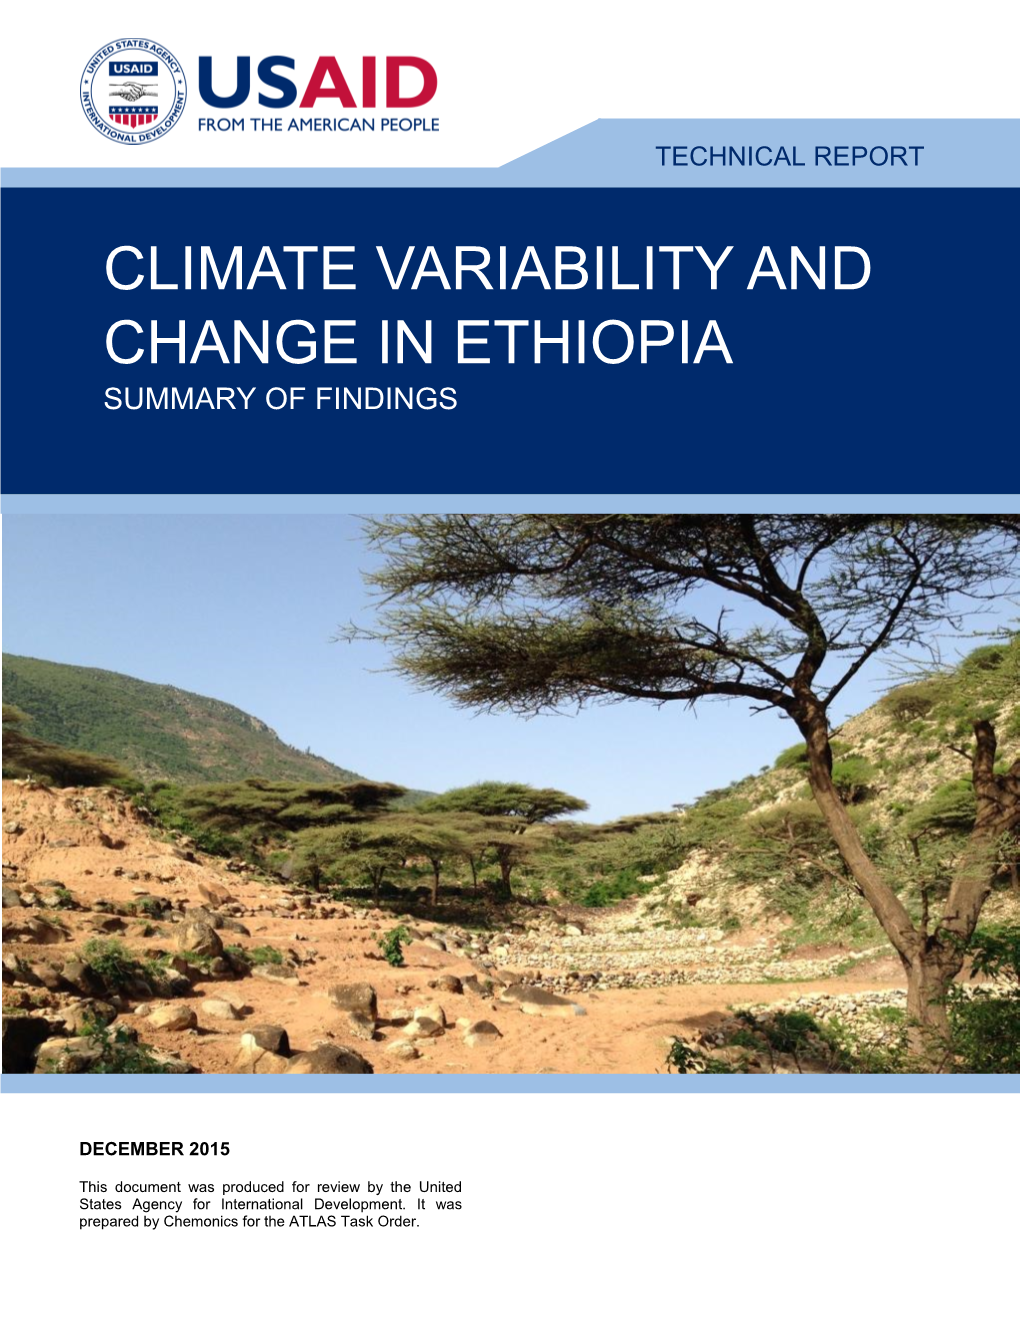 Climate Variability and Change in Ethiopia Summary of Findings